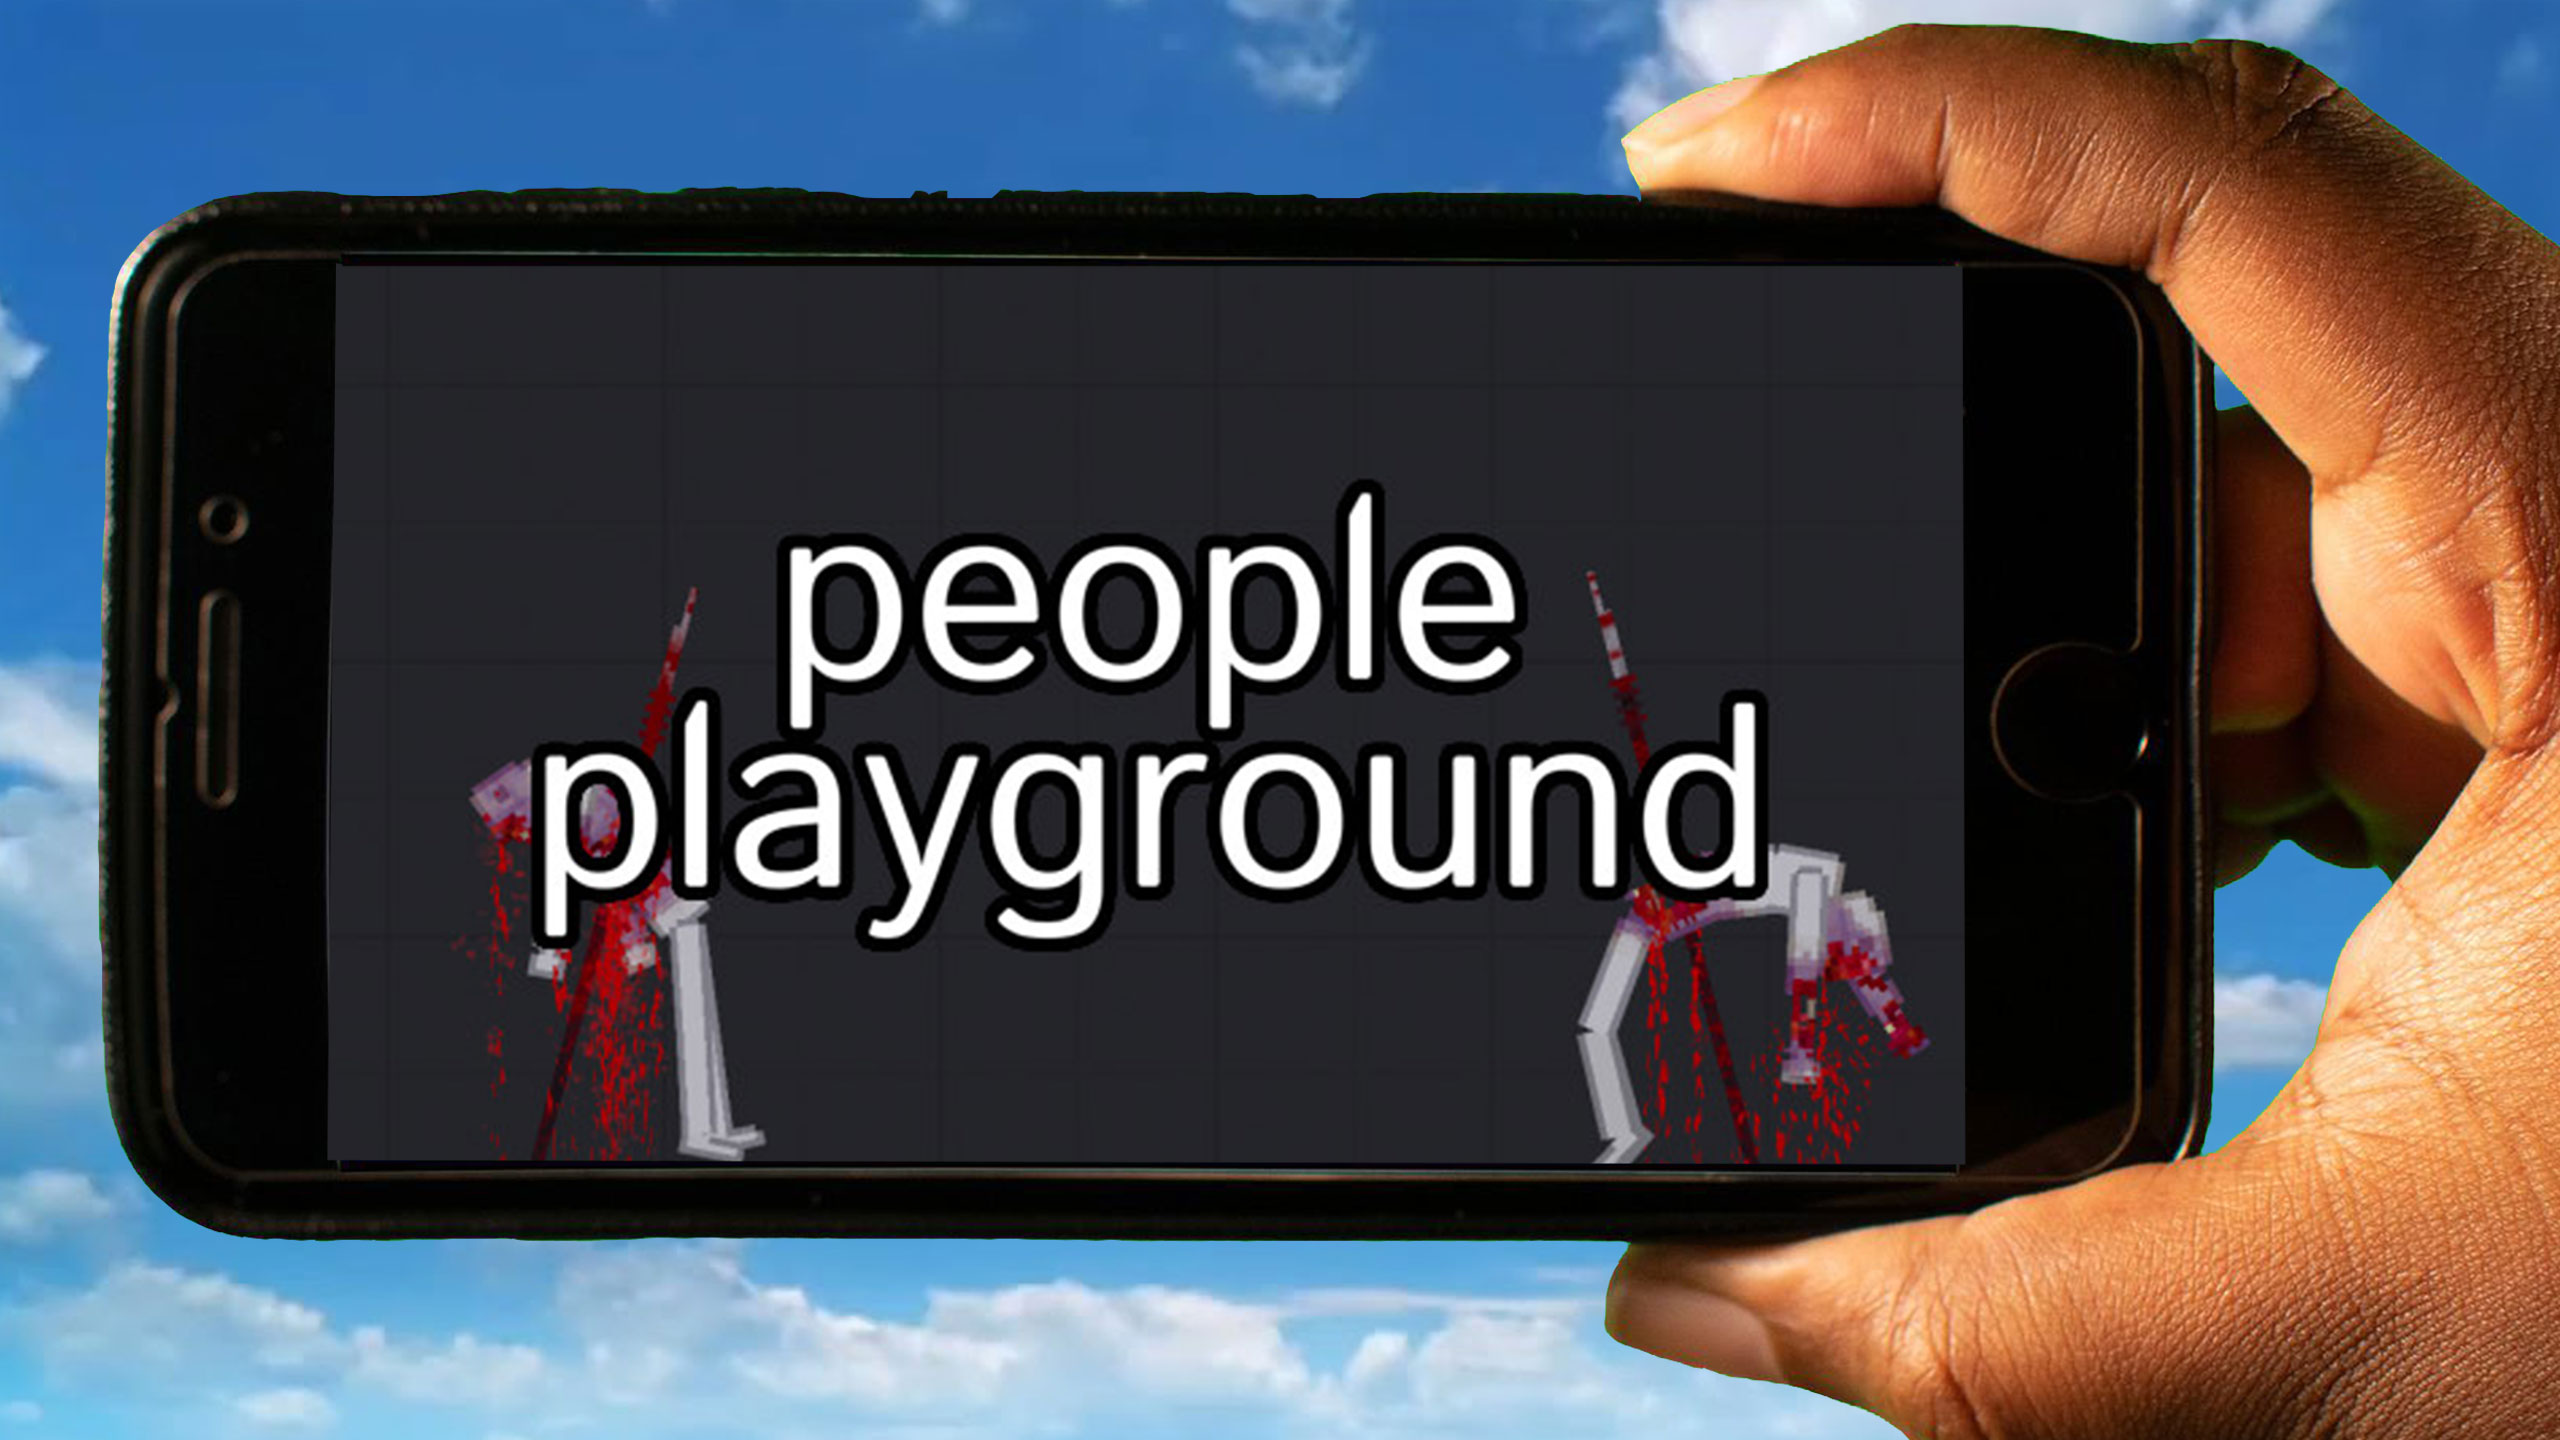 About: people playground mobile tips (Google Play version)